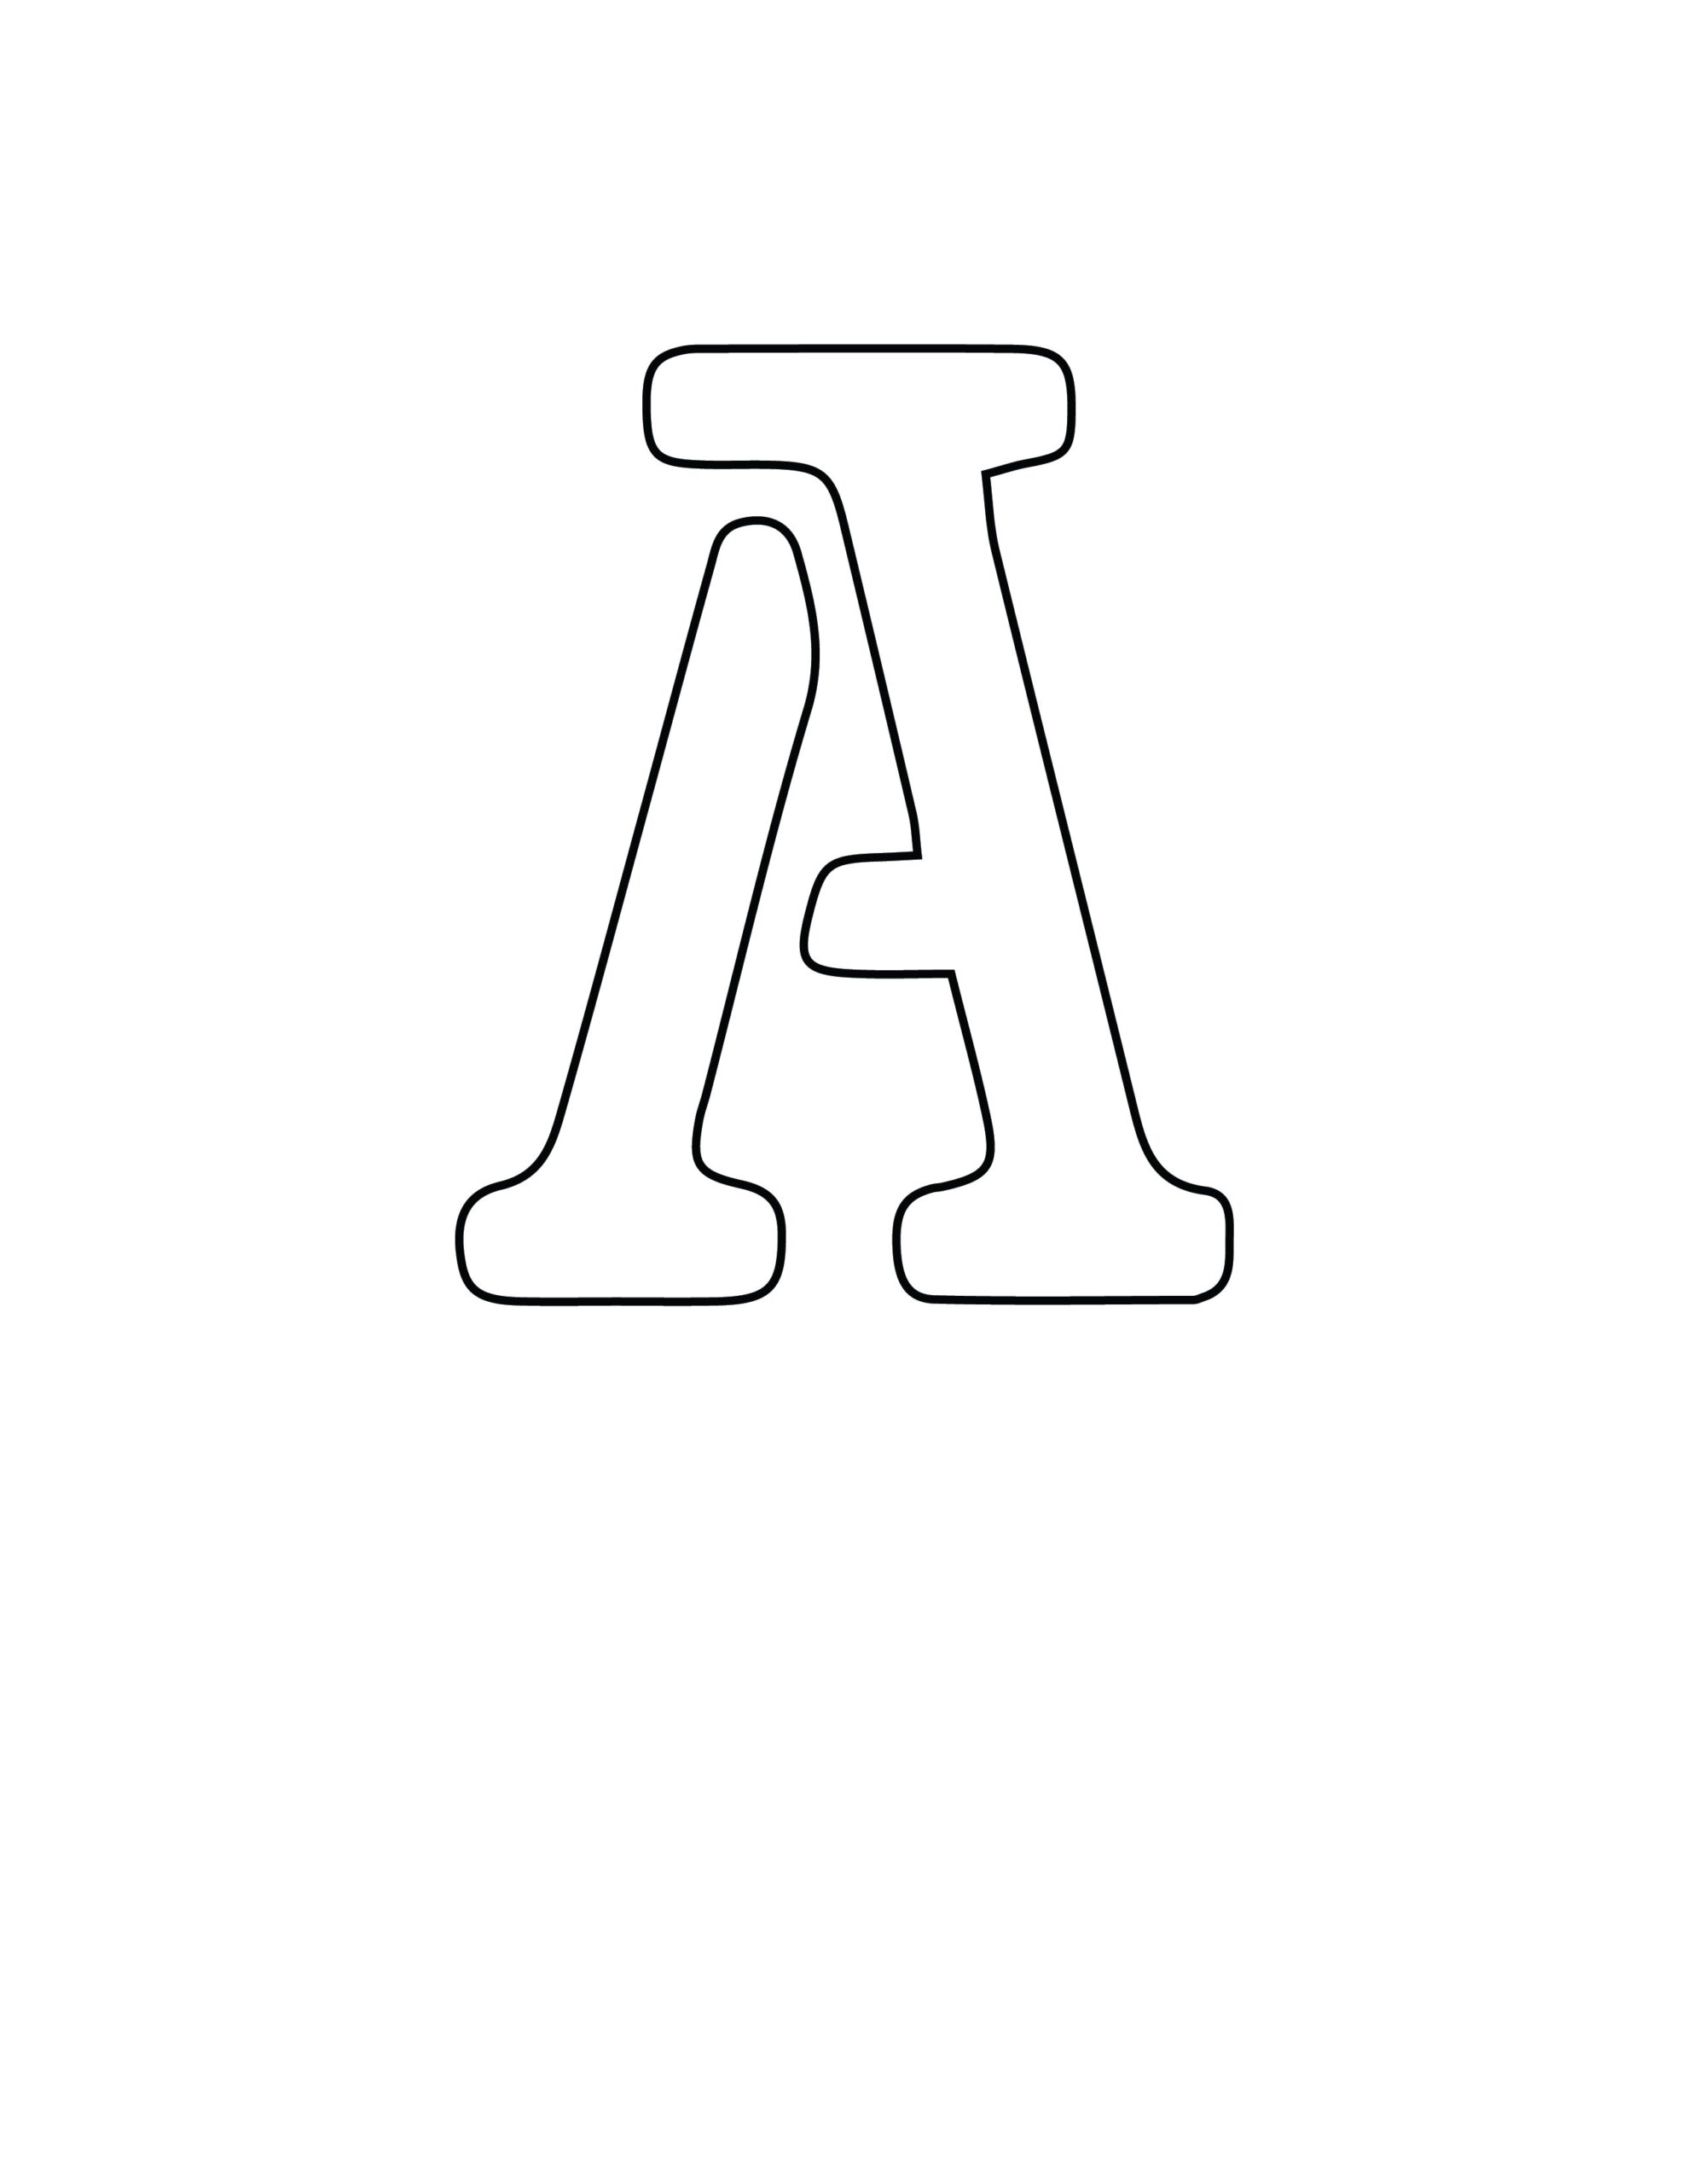 Free Printable Letter Stencils Letter A Stencil Freebie Finding Mom - Free Printable Alphabet Stencils Templates